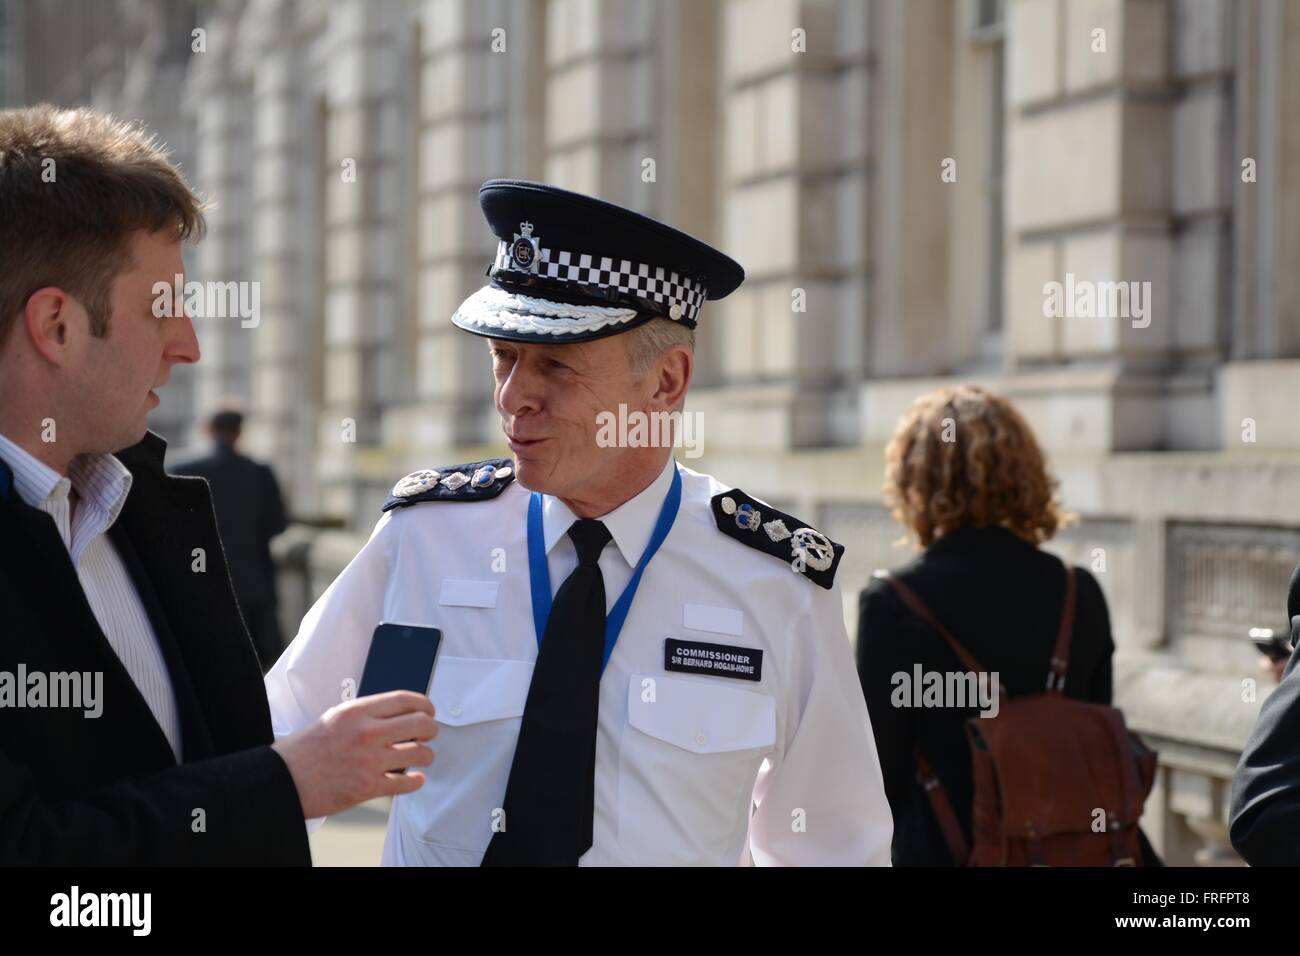 London, UK. 22nd March, 2016. Met Police commissioner, Sir Bernard Hogan-Howe, arrives at the COBRA meeting  and talks to journalists in Whitehall following the terror attacks in Belgium. Credit: Marc Ward/Alamy Live News Stock Photo